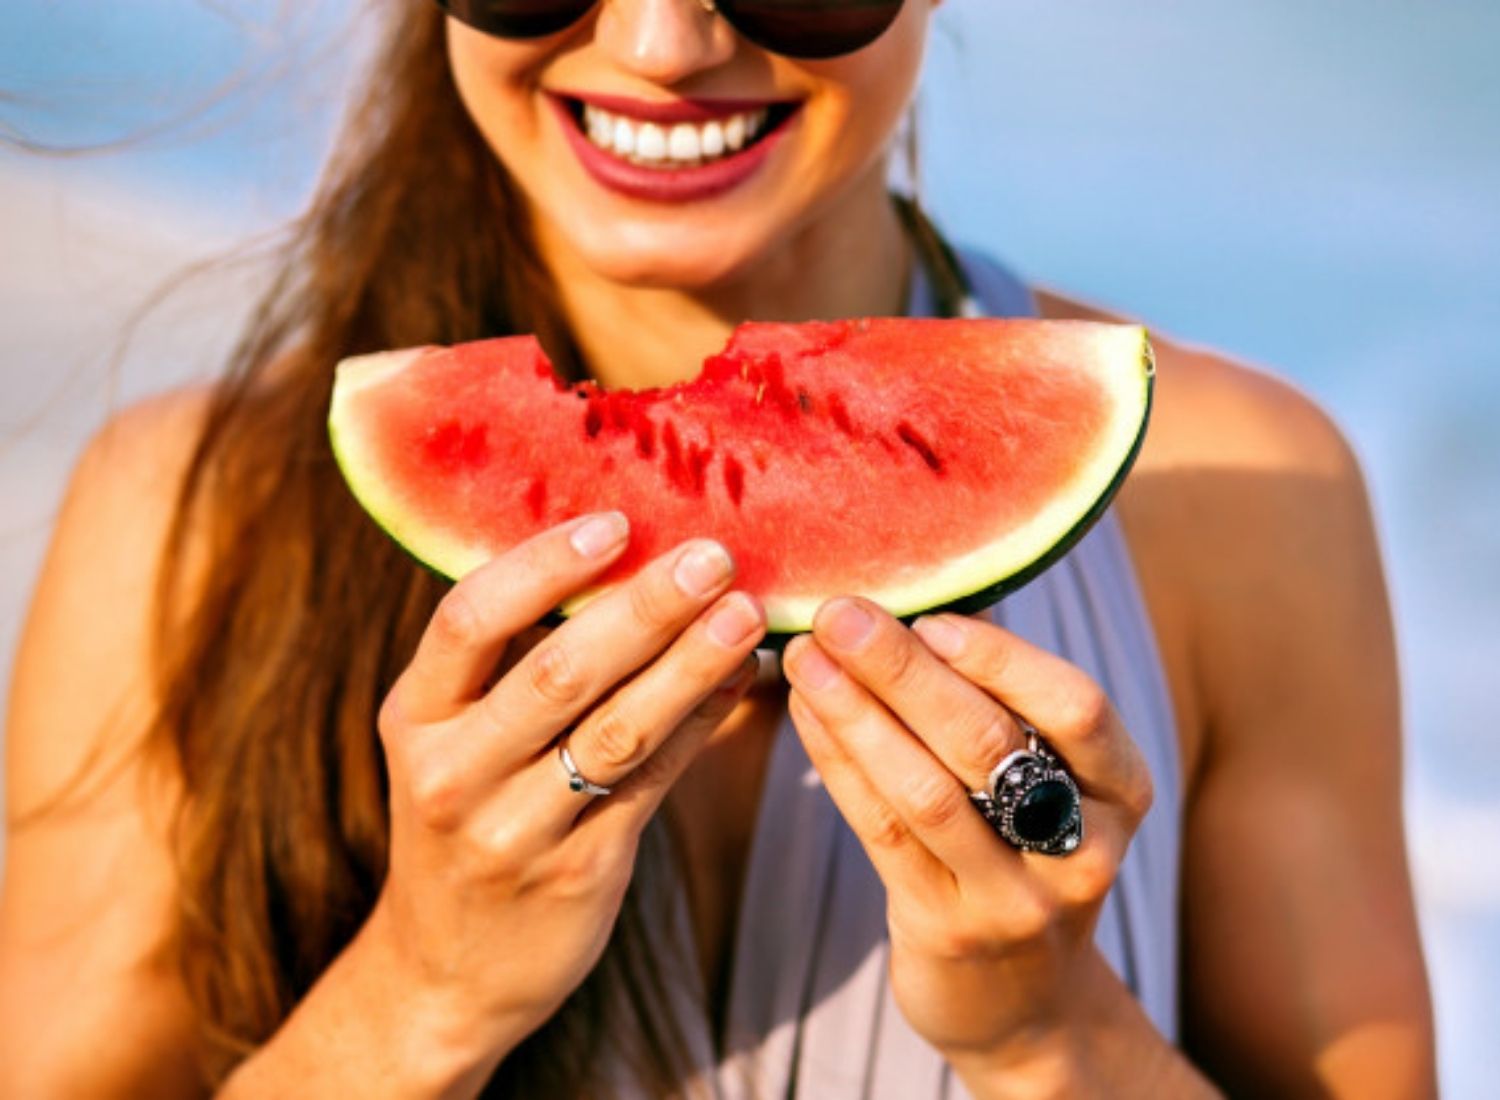 6 Health Benefits Of Eating Watermelons Everyone Should Be Aware Of